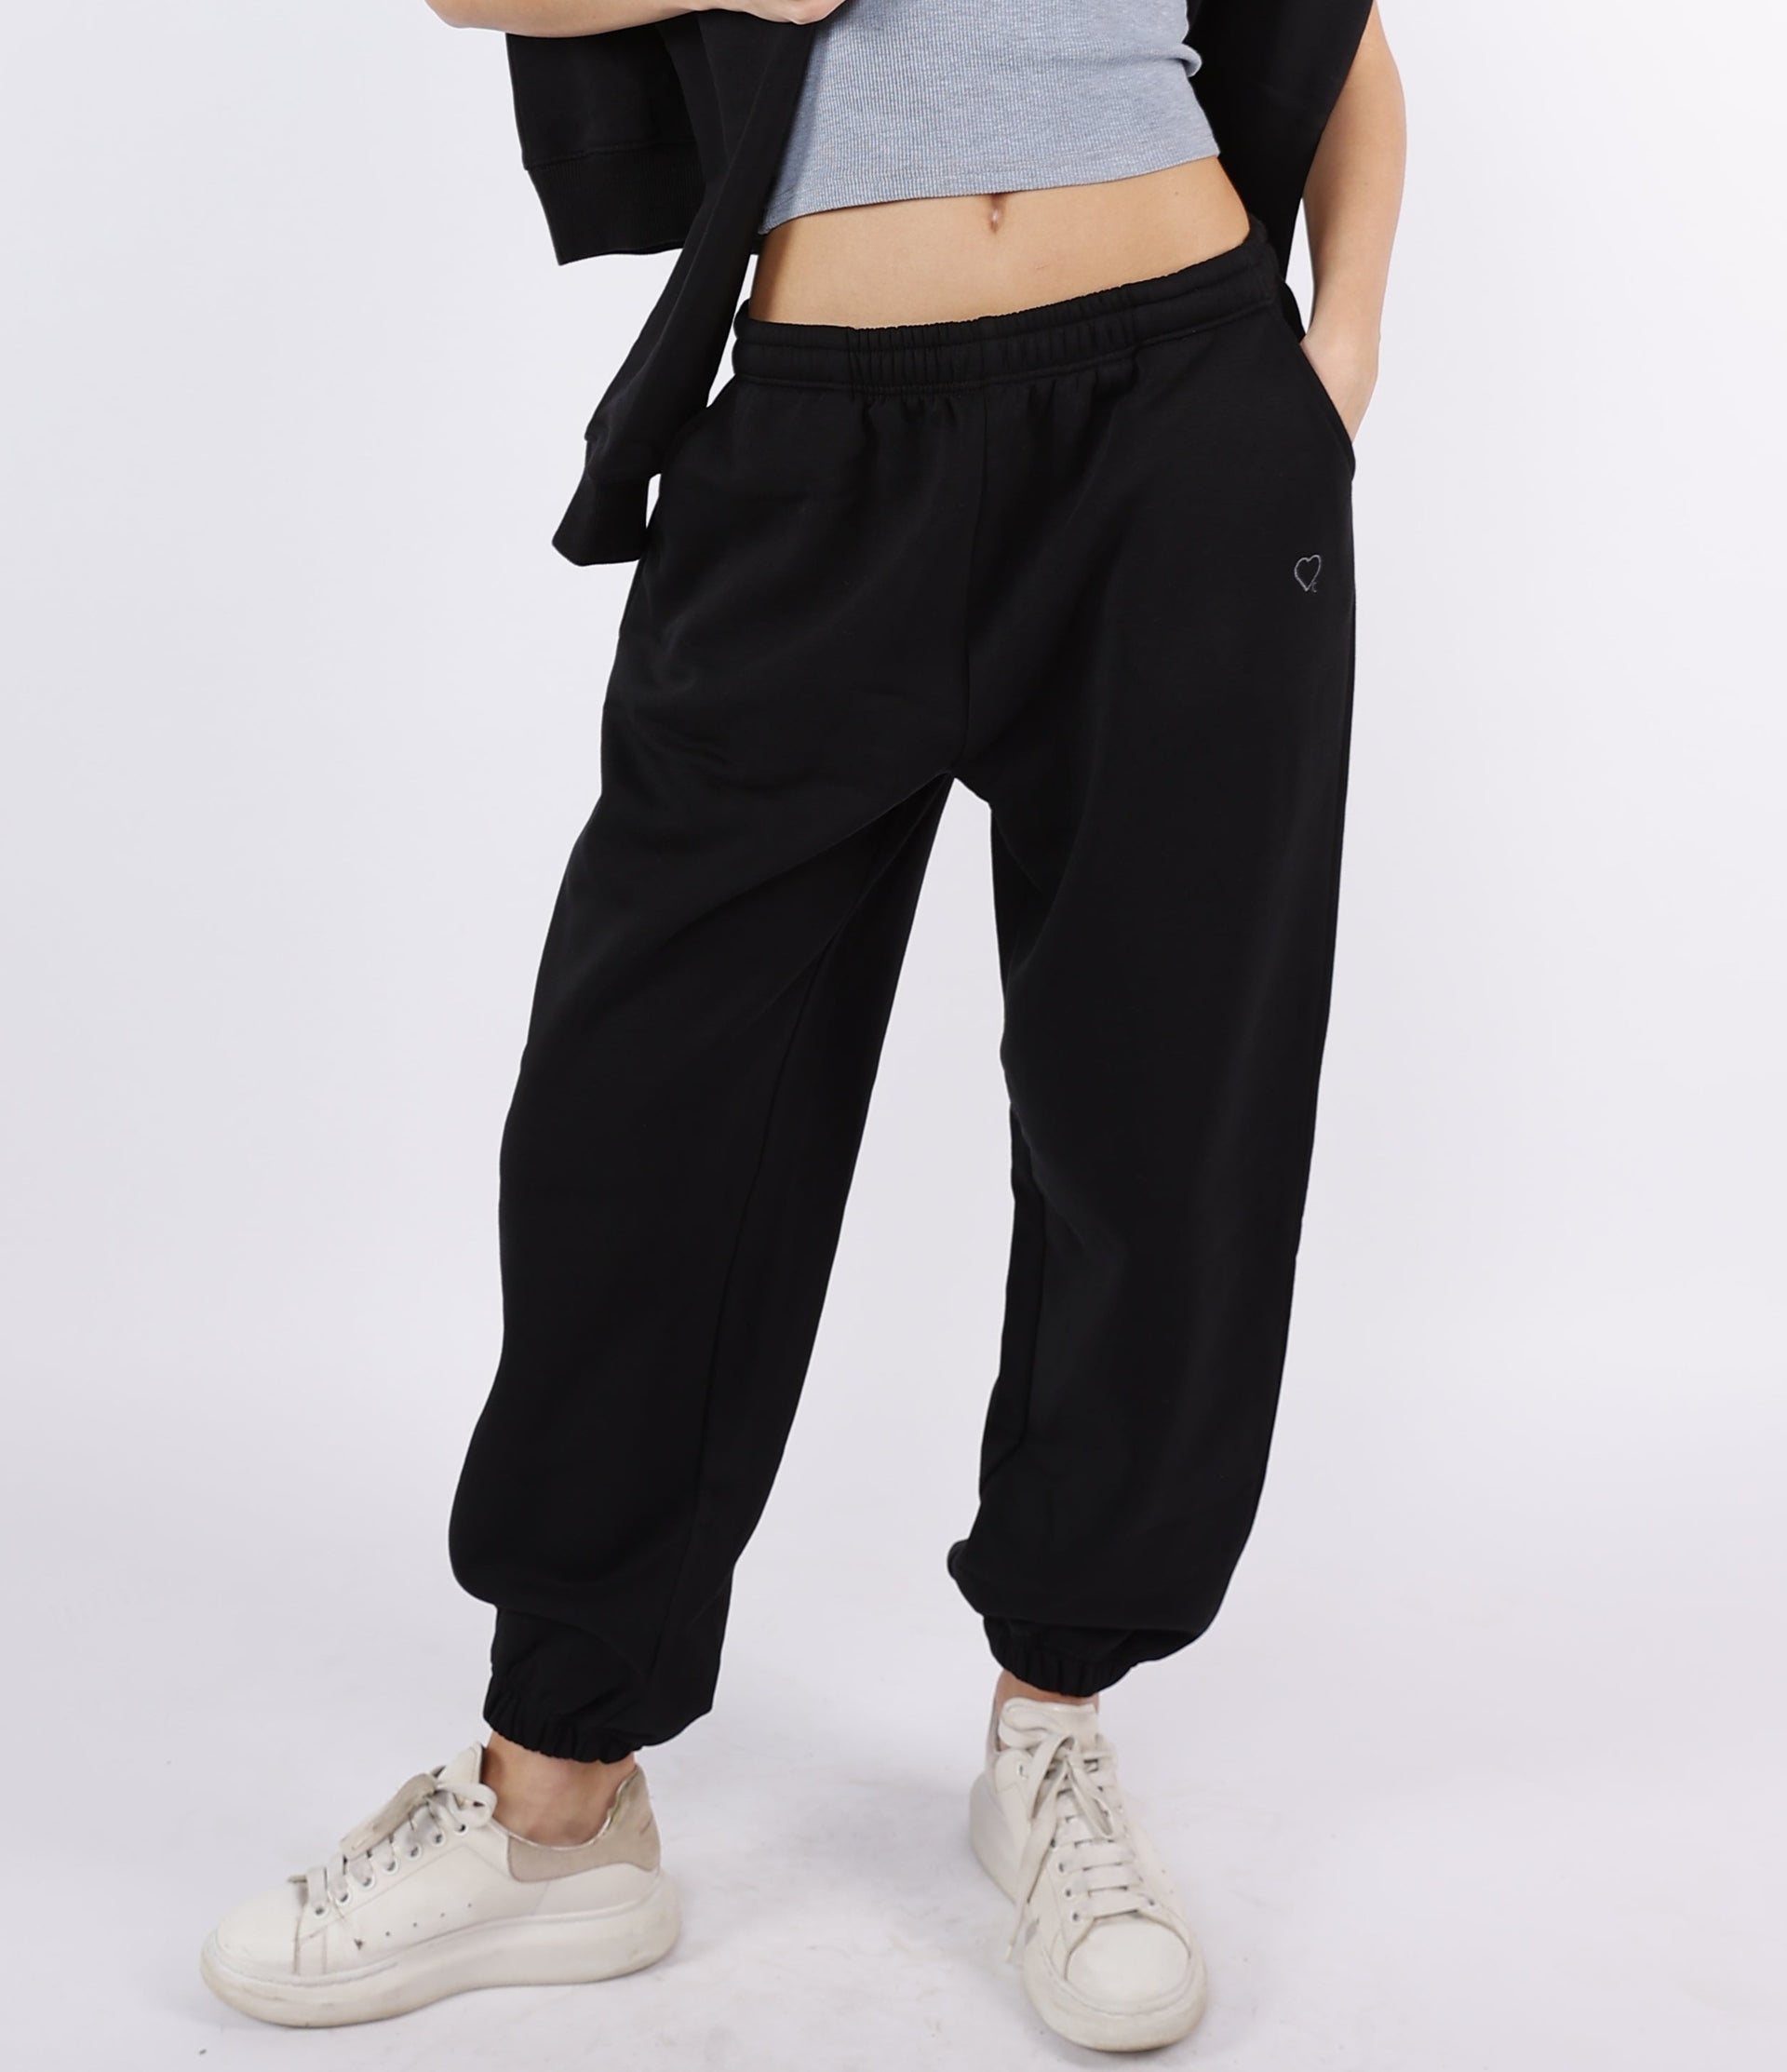 Tsuretobe Embroidered High Waist Sweatpants For Women Streetwear Joggers  With Patchwork Colored Design Casual Gym Trousers For Ladies For Females  201106 From Mu02, $17.04